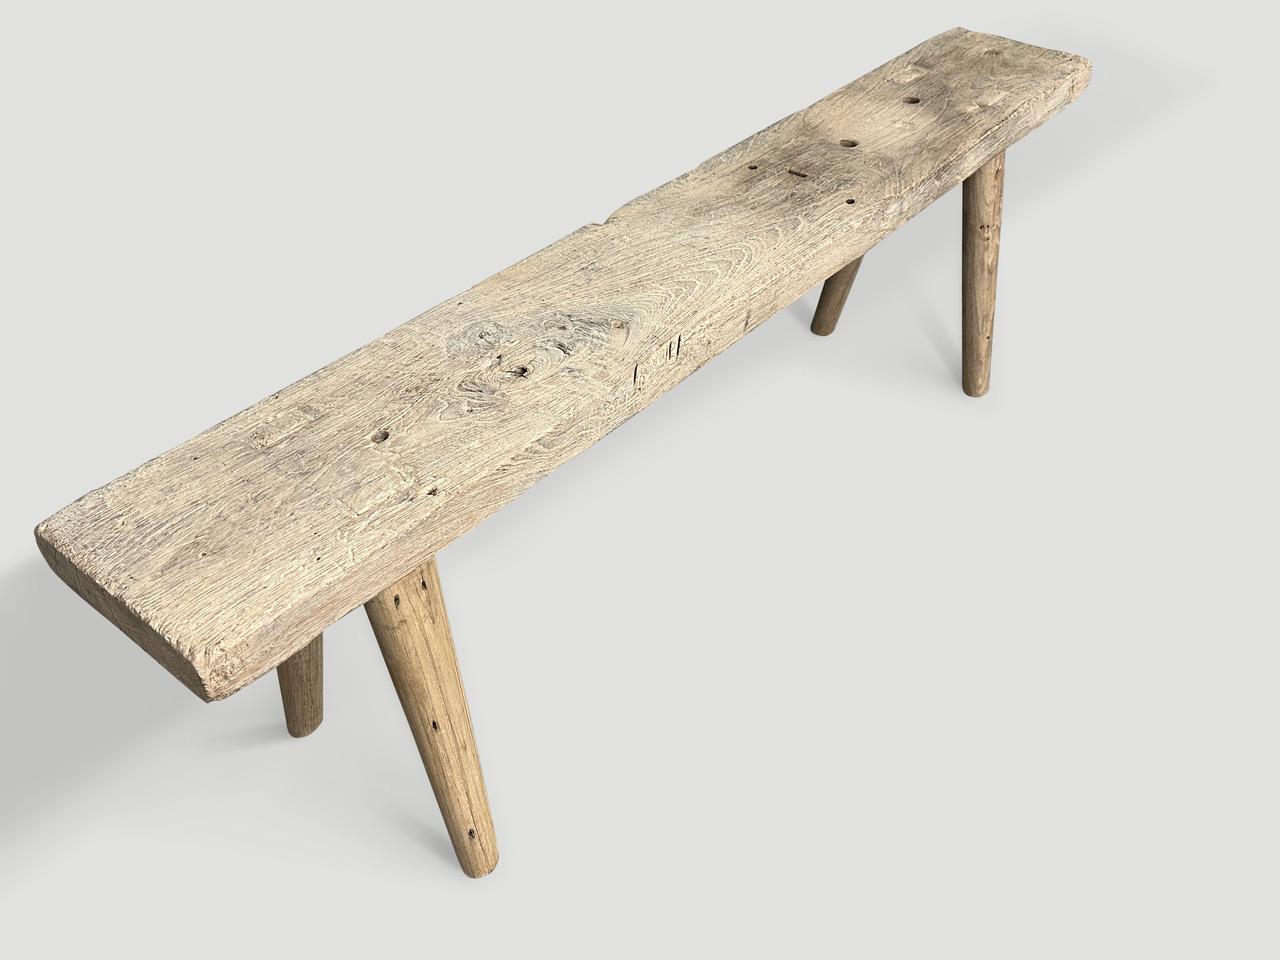 A single two inch thick antique panel with lovely character within the wood. We added smooth teak minimalist legs to produce this beautiful bench and finished with a secret ingredient, revealing the unique wood grain. It’s all in the details.

This